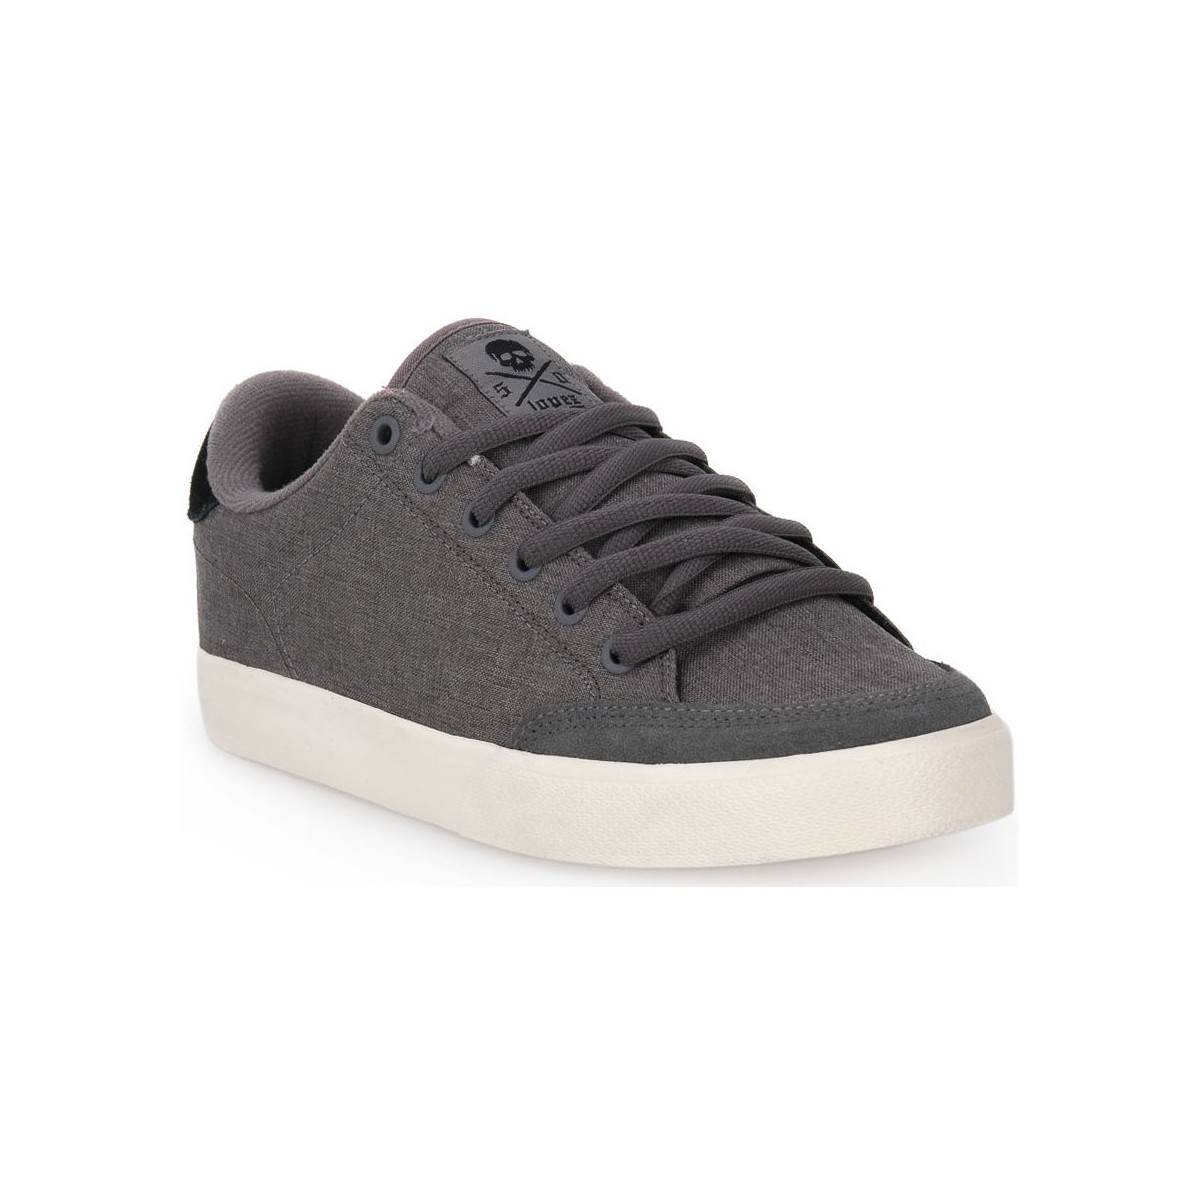 Xαμηλά Sneakers C1rca C1RCA AL 50 CHARCOAL OFF WHITE